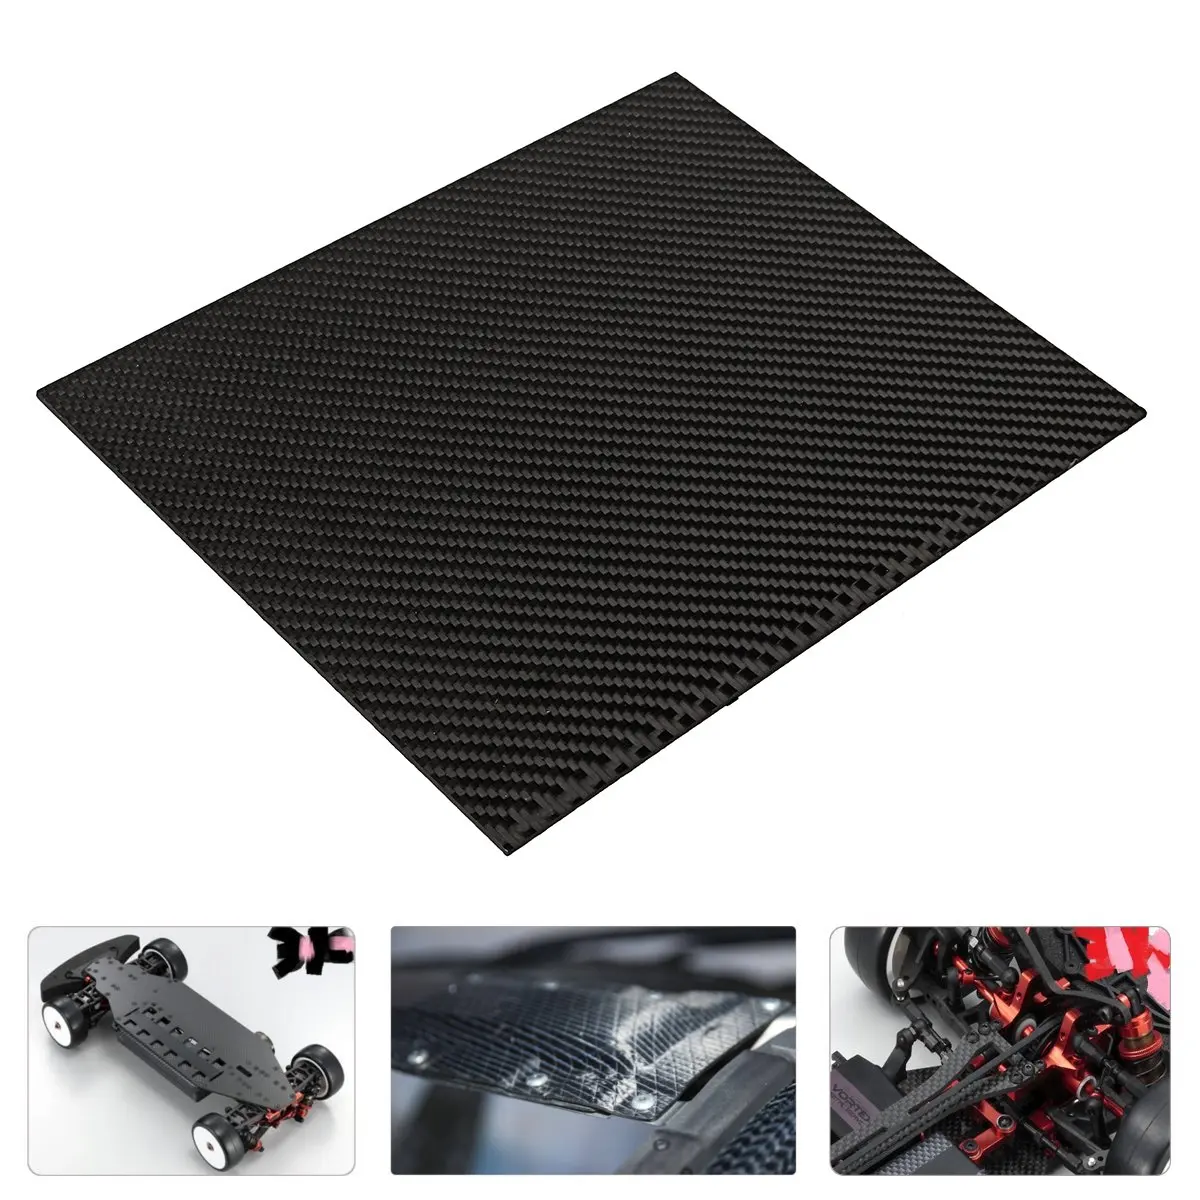 

0.5-2mm 200 X 250mm 3K Matt Surface Carbon Plate Panel Sheets High Composite Hardness Material Carbon Fiber Board for RC Vehicle